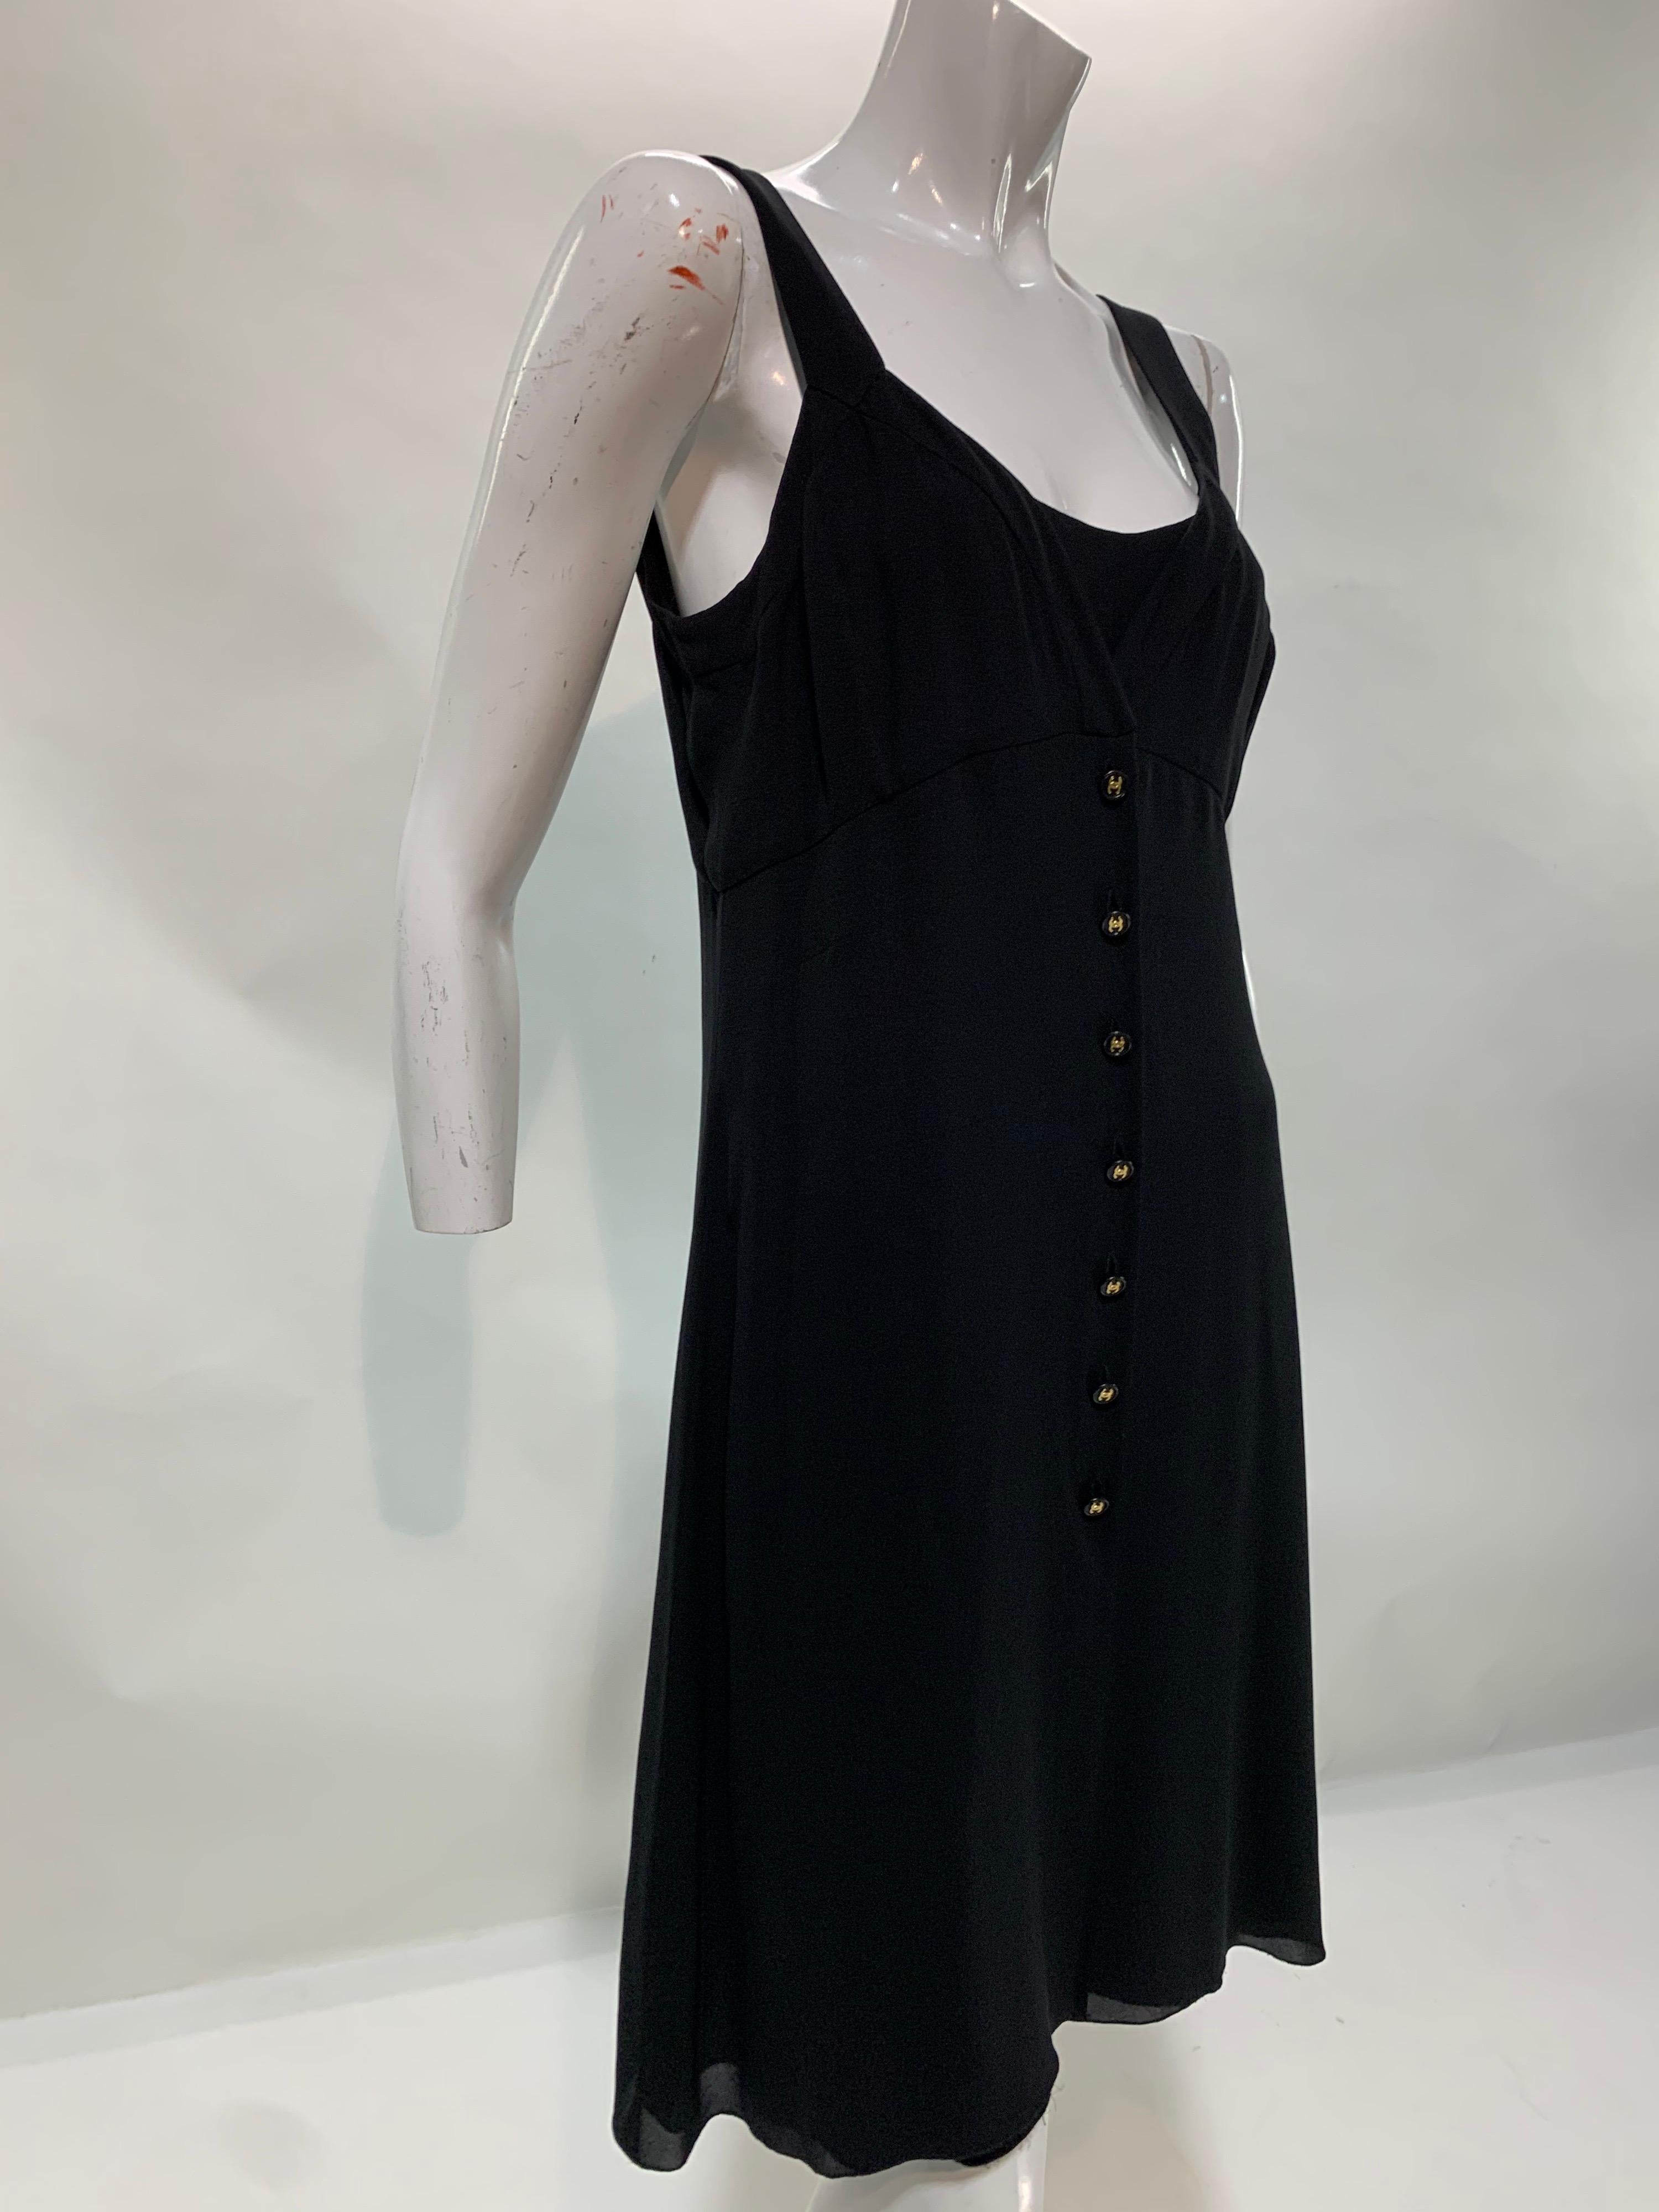 A wonderful Chanel 1997 Spring Collection 2-piece silk crepe slip dress by Karl Lagerfeld in essential basic black. Buttons down the front with 